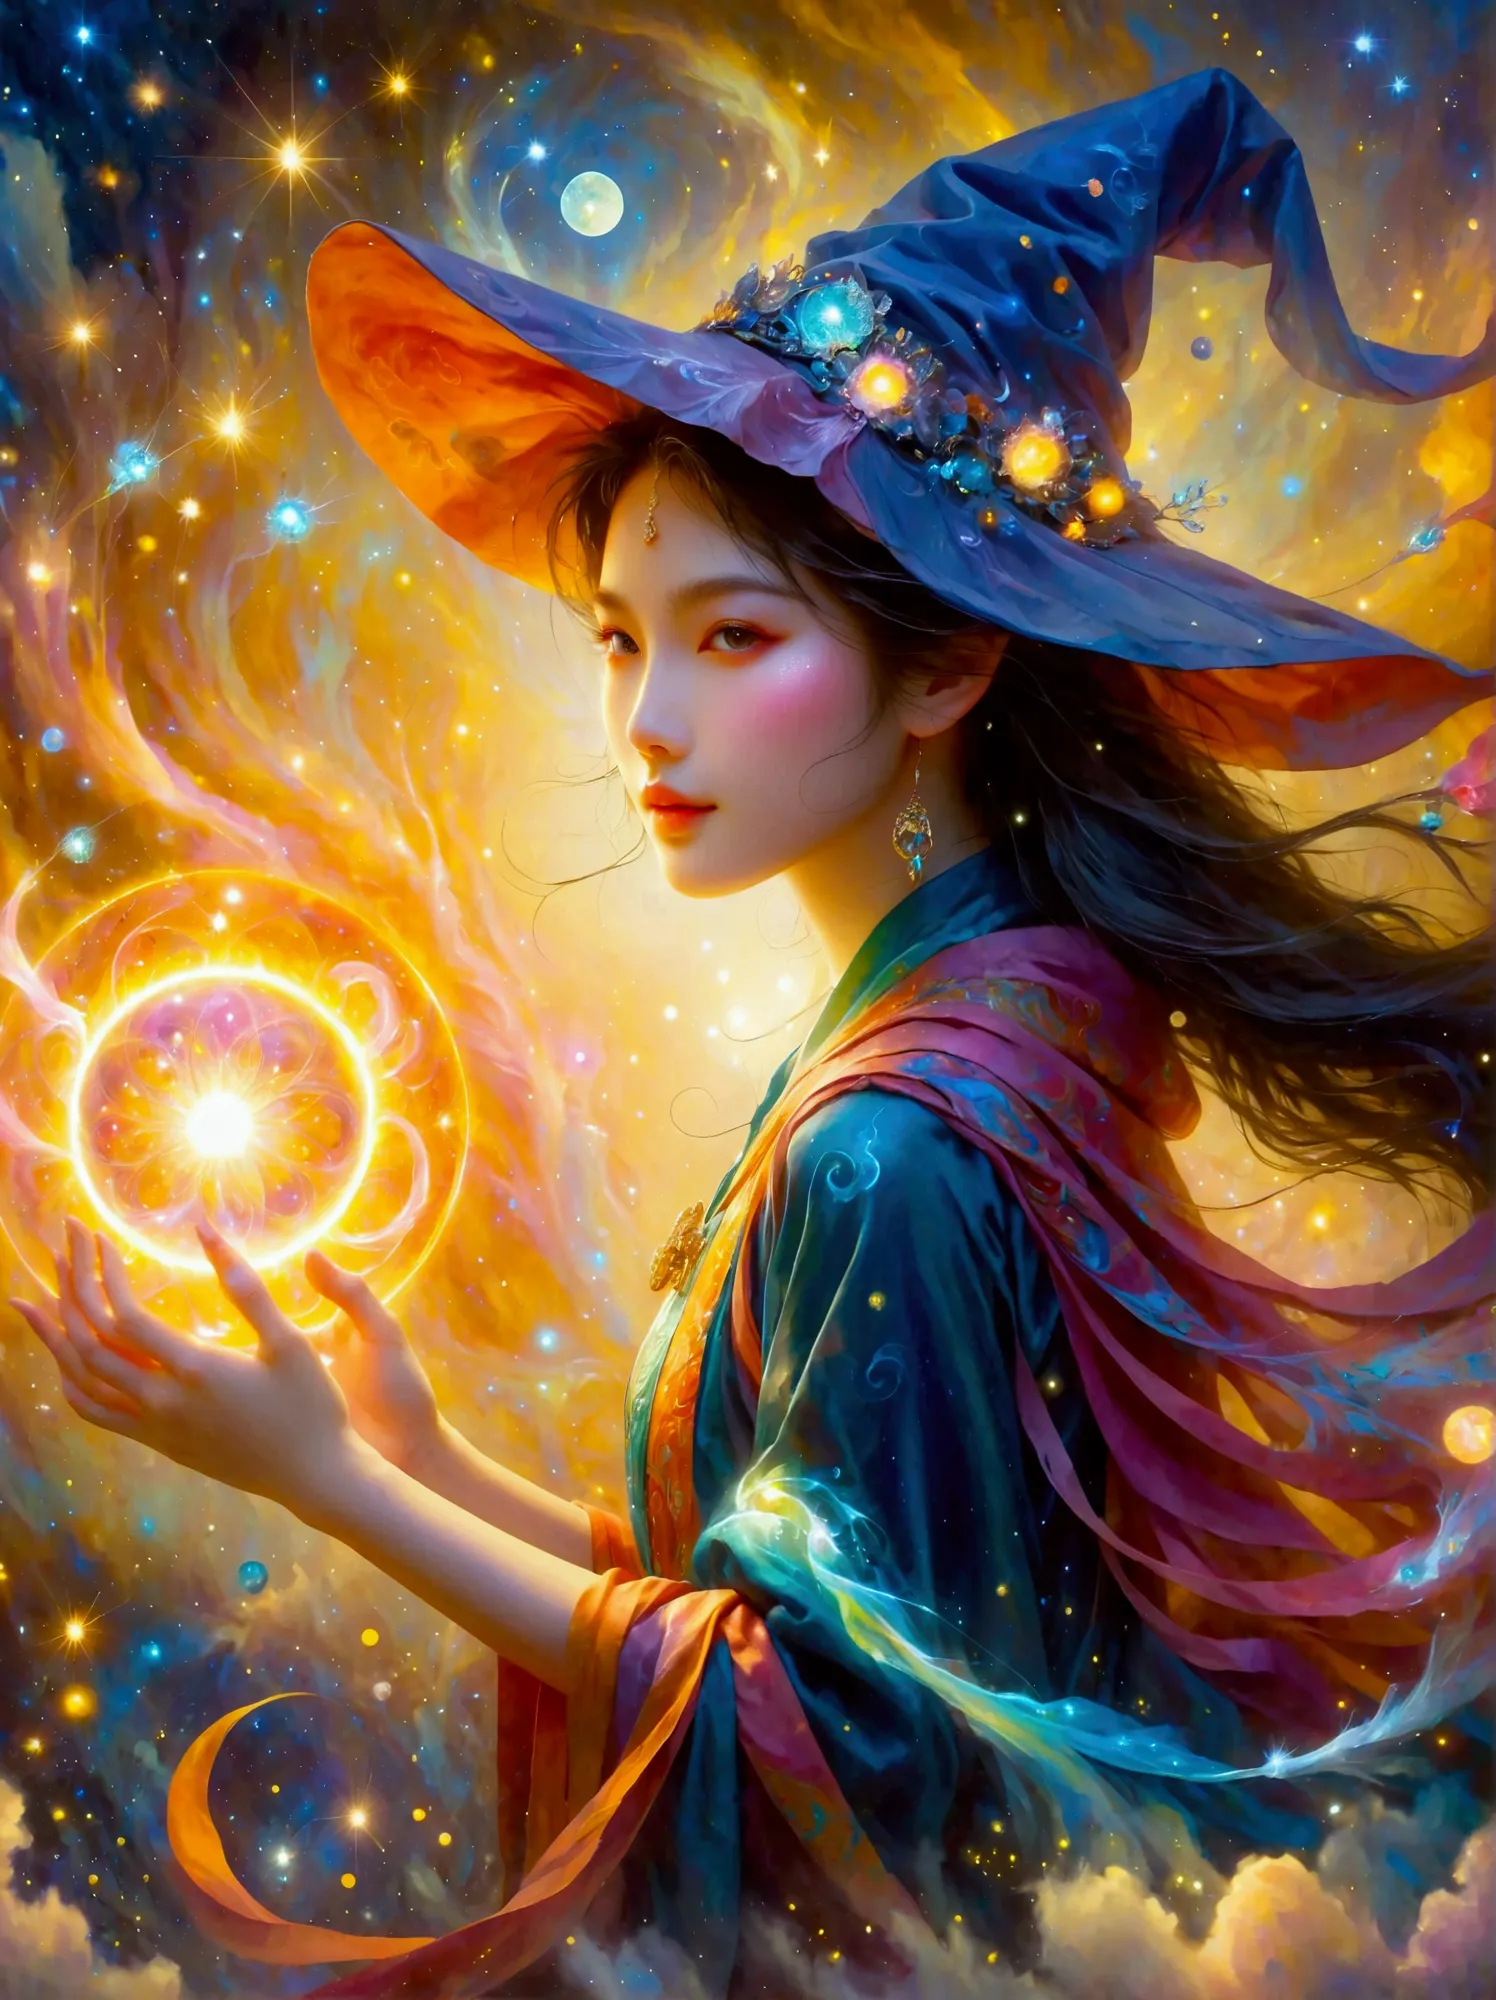 An imaginative scene depicting a youthful female sorceress of East Asian descent, named My, She is powerfully invoking magical s...